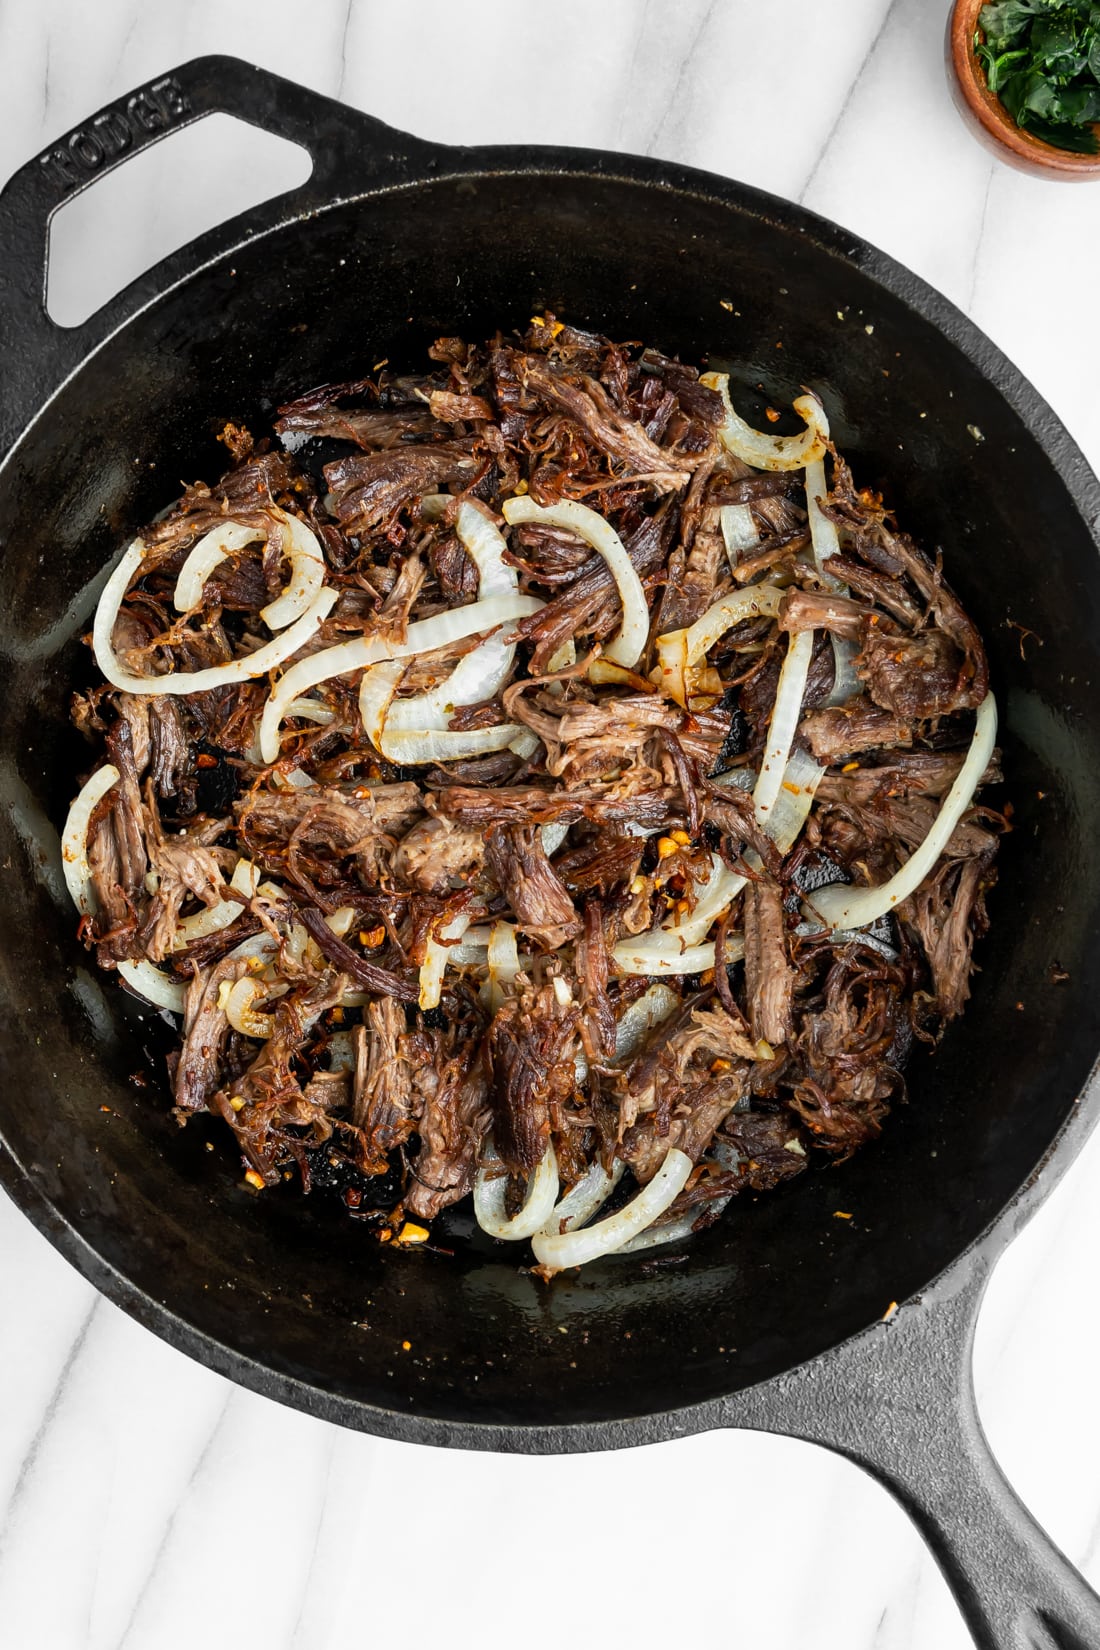 vaca frita with sautéed onions in a pan after being fried.